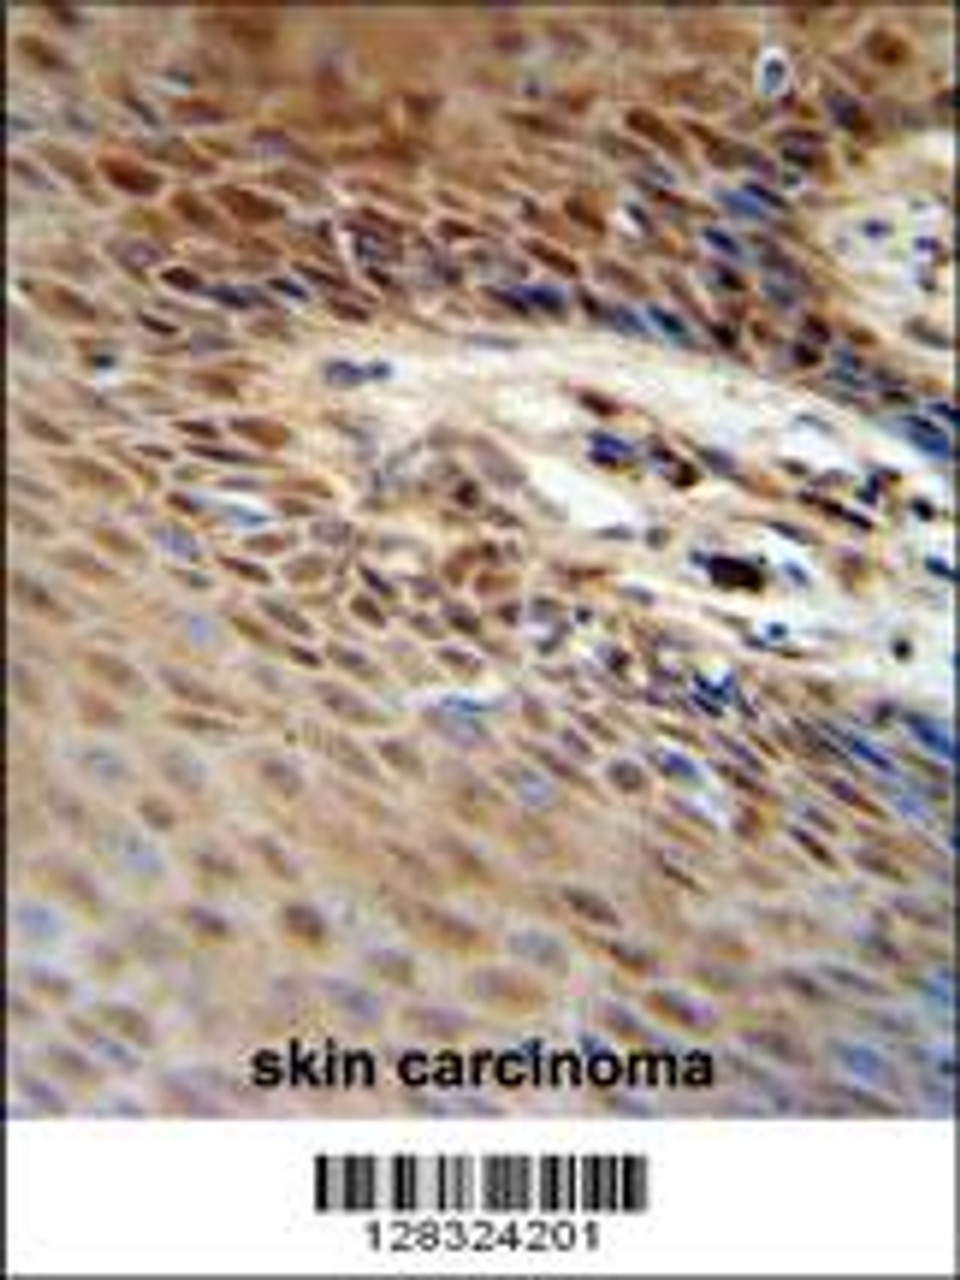 ZNF324B antibody immunohistochemistry analysis in formalin fixed and paraffin embedded human skin carcinoma followed by peroxidase conjugation of the secondary antibody and DAB staining.